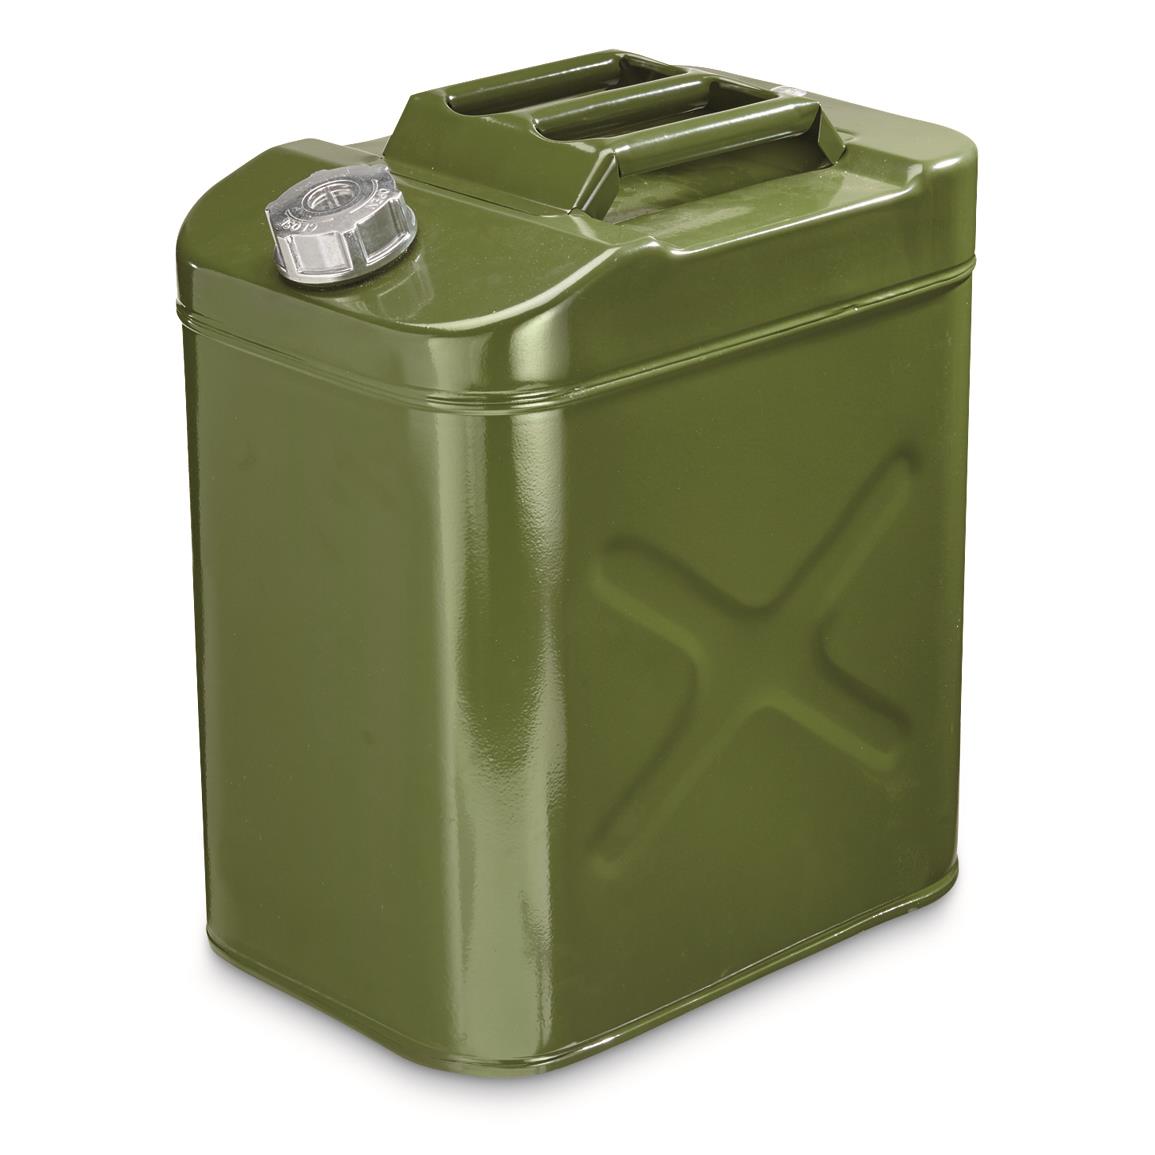 U.S. Military Style Steel Jerry Can, 30 Liter, Reproduction